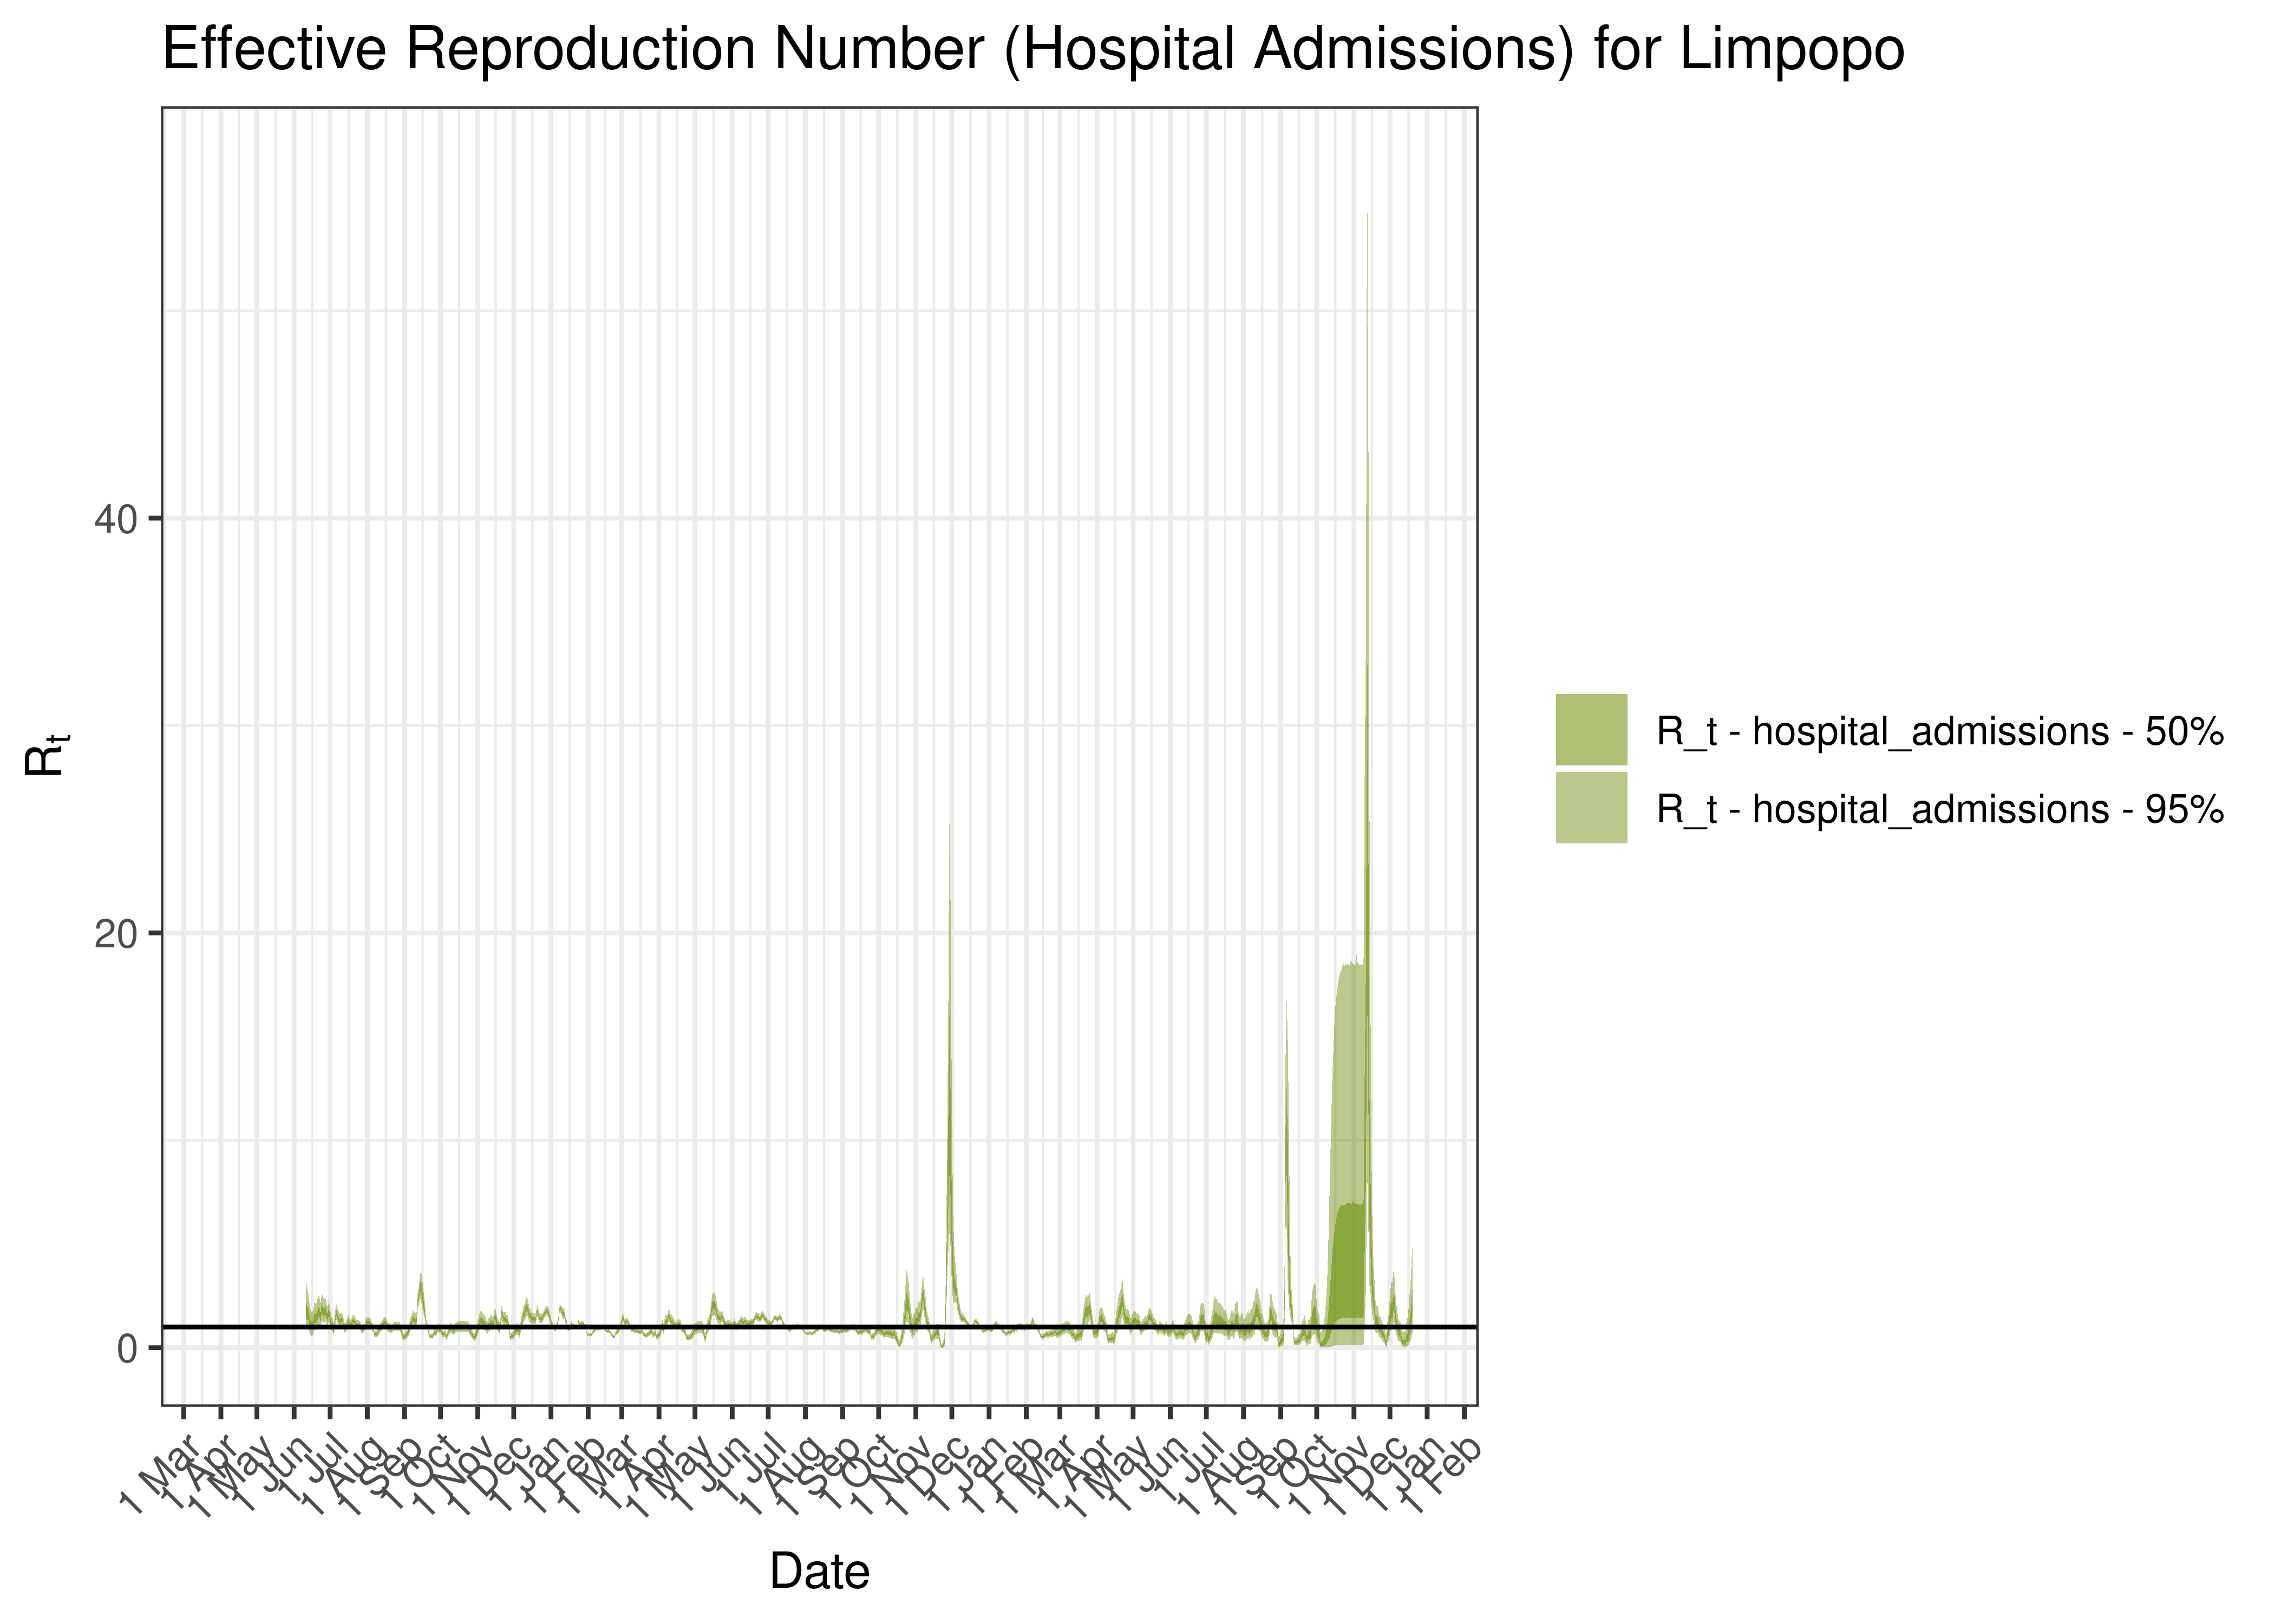 Estimated Effective Reproduction Number Based on Hospital Admissions for Limpopo since 1 April 2020